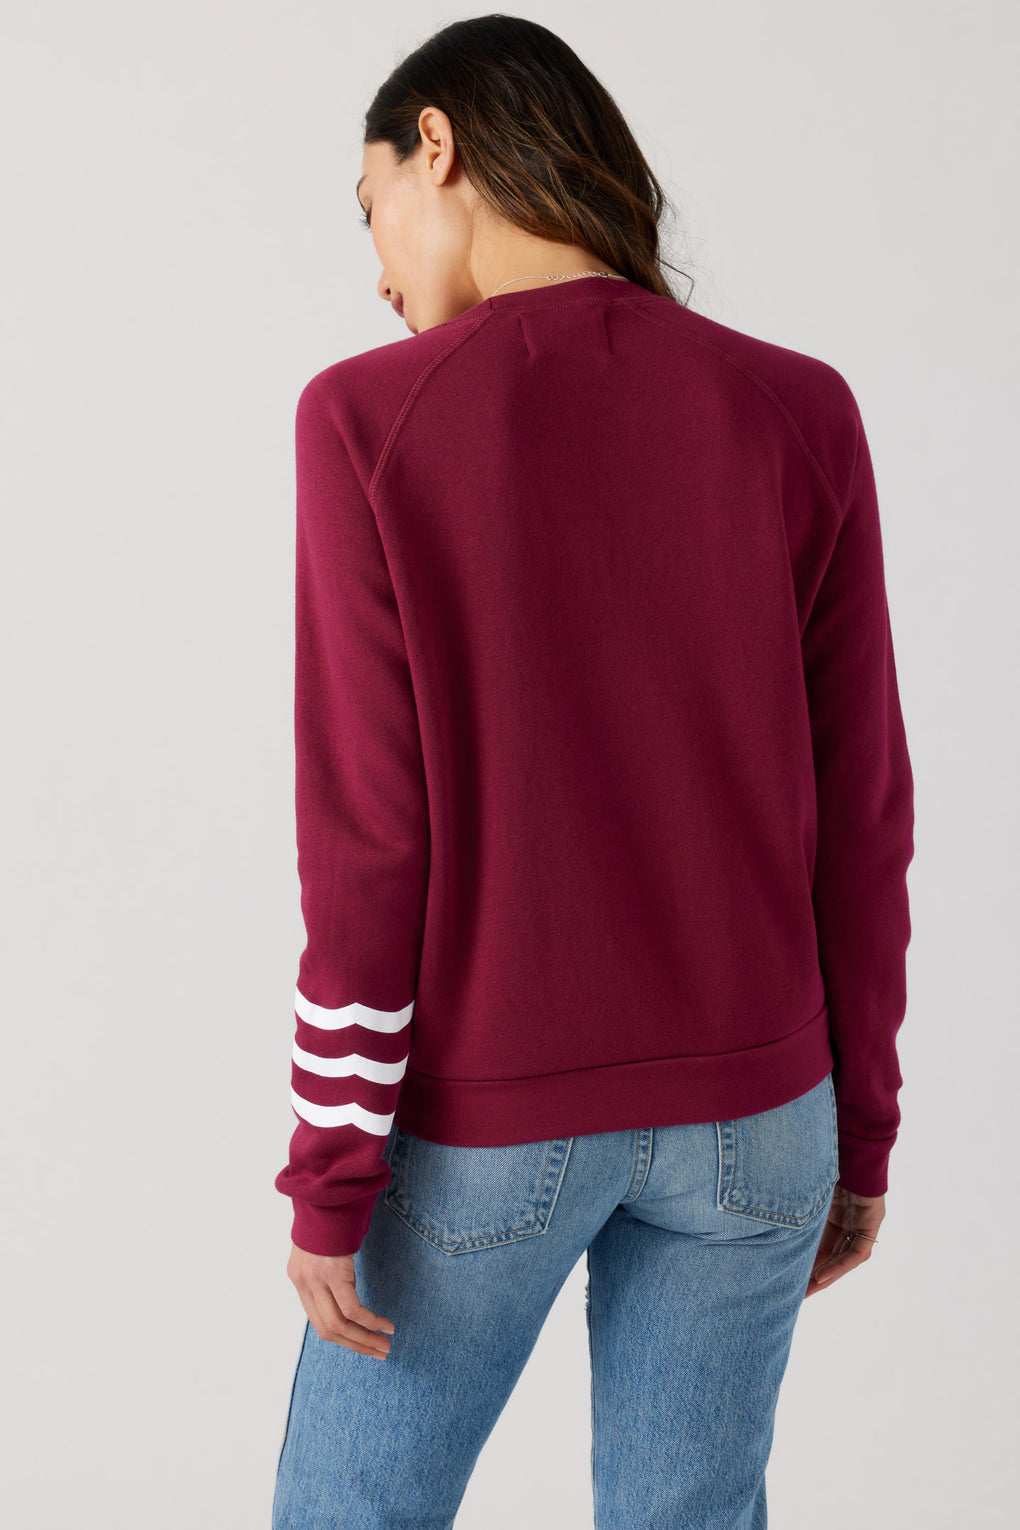 SOL ANGELES Waves Pullover Cranberry